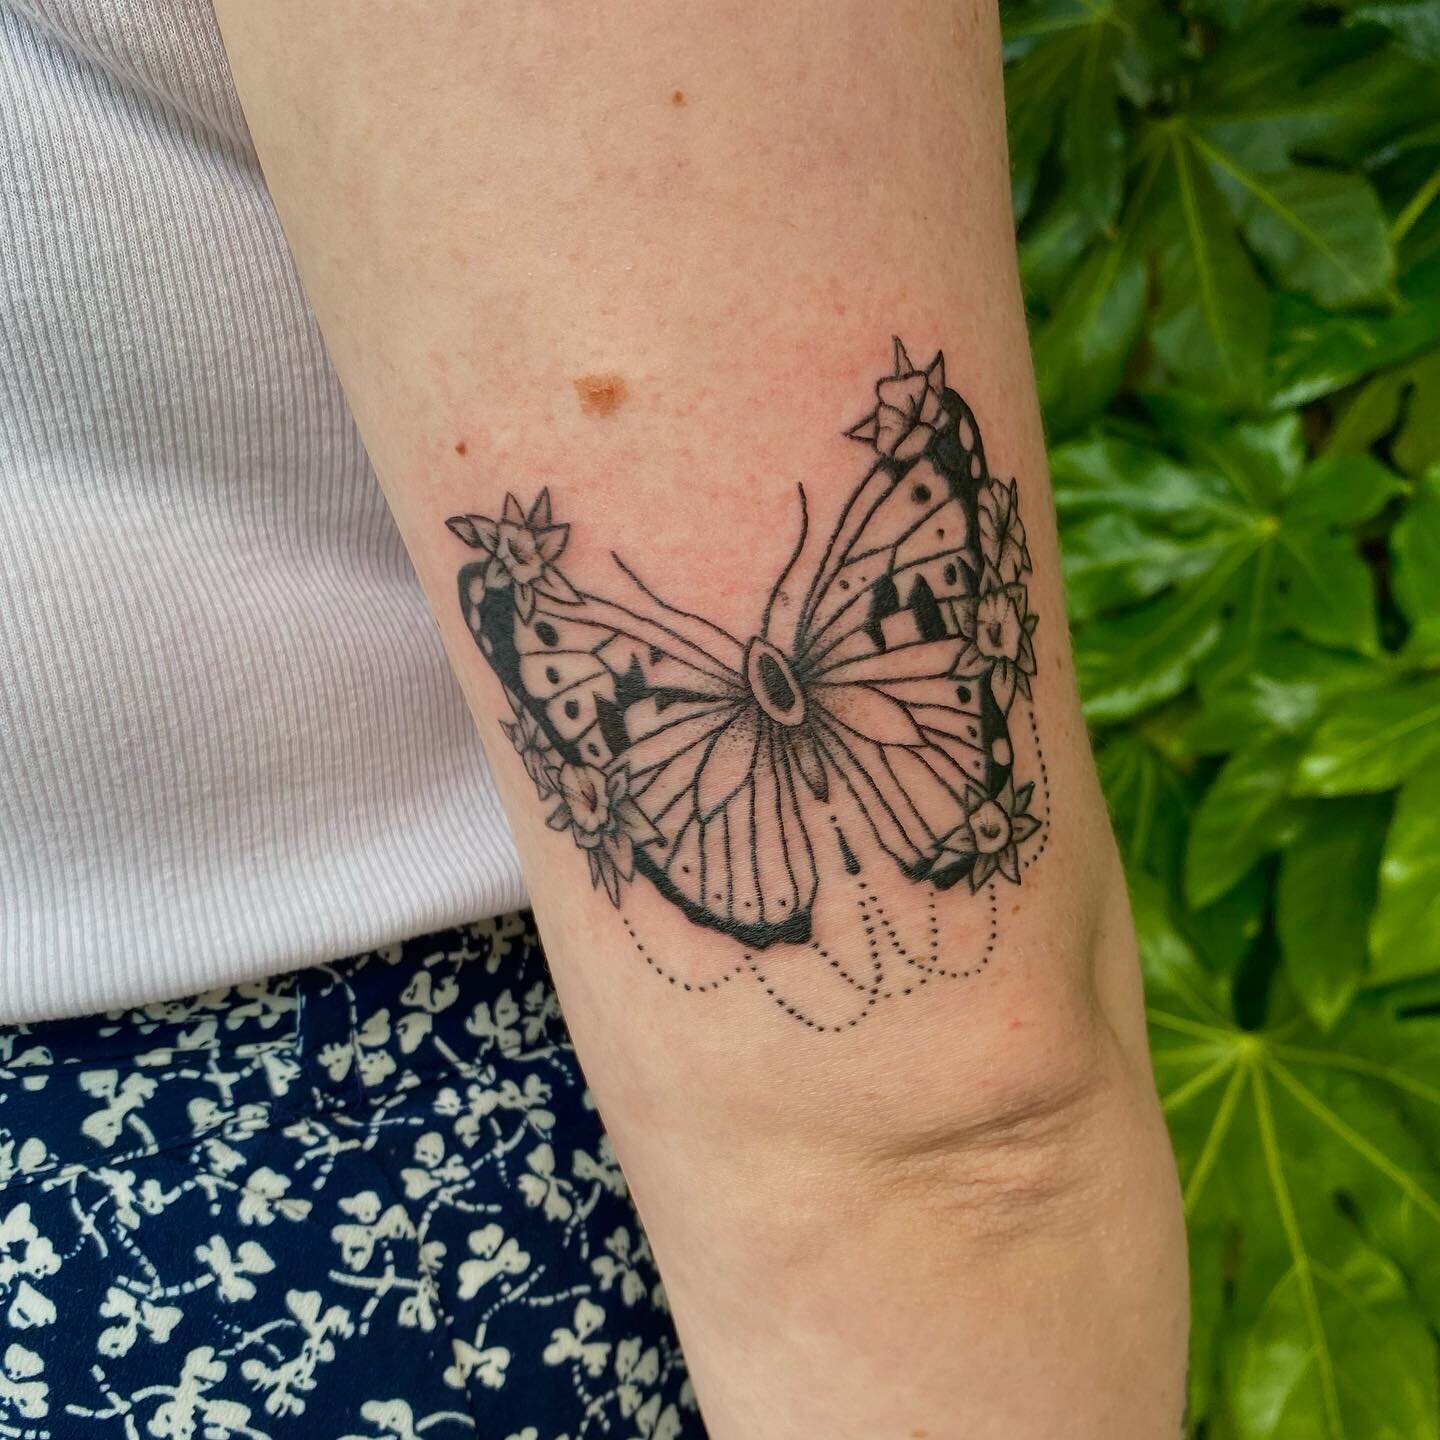 Reworked this butterfly today 🦋